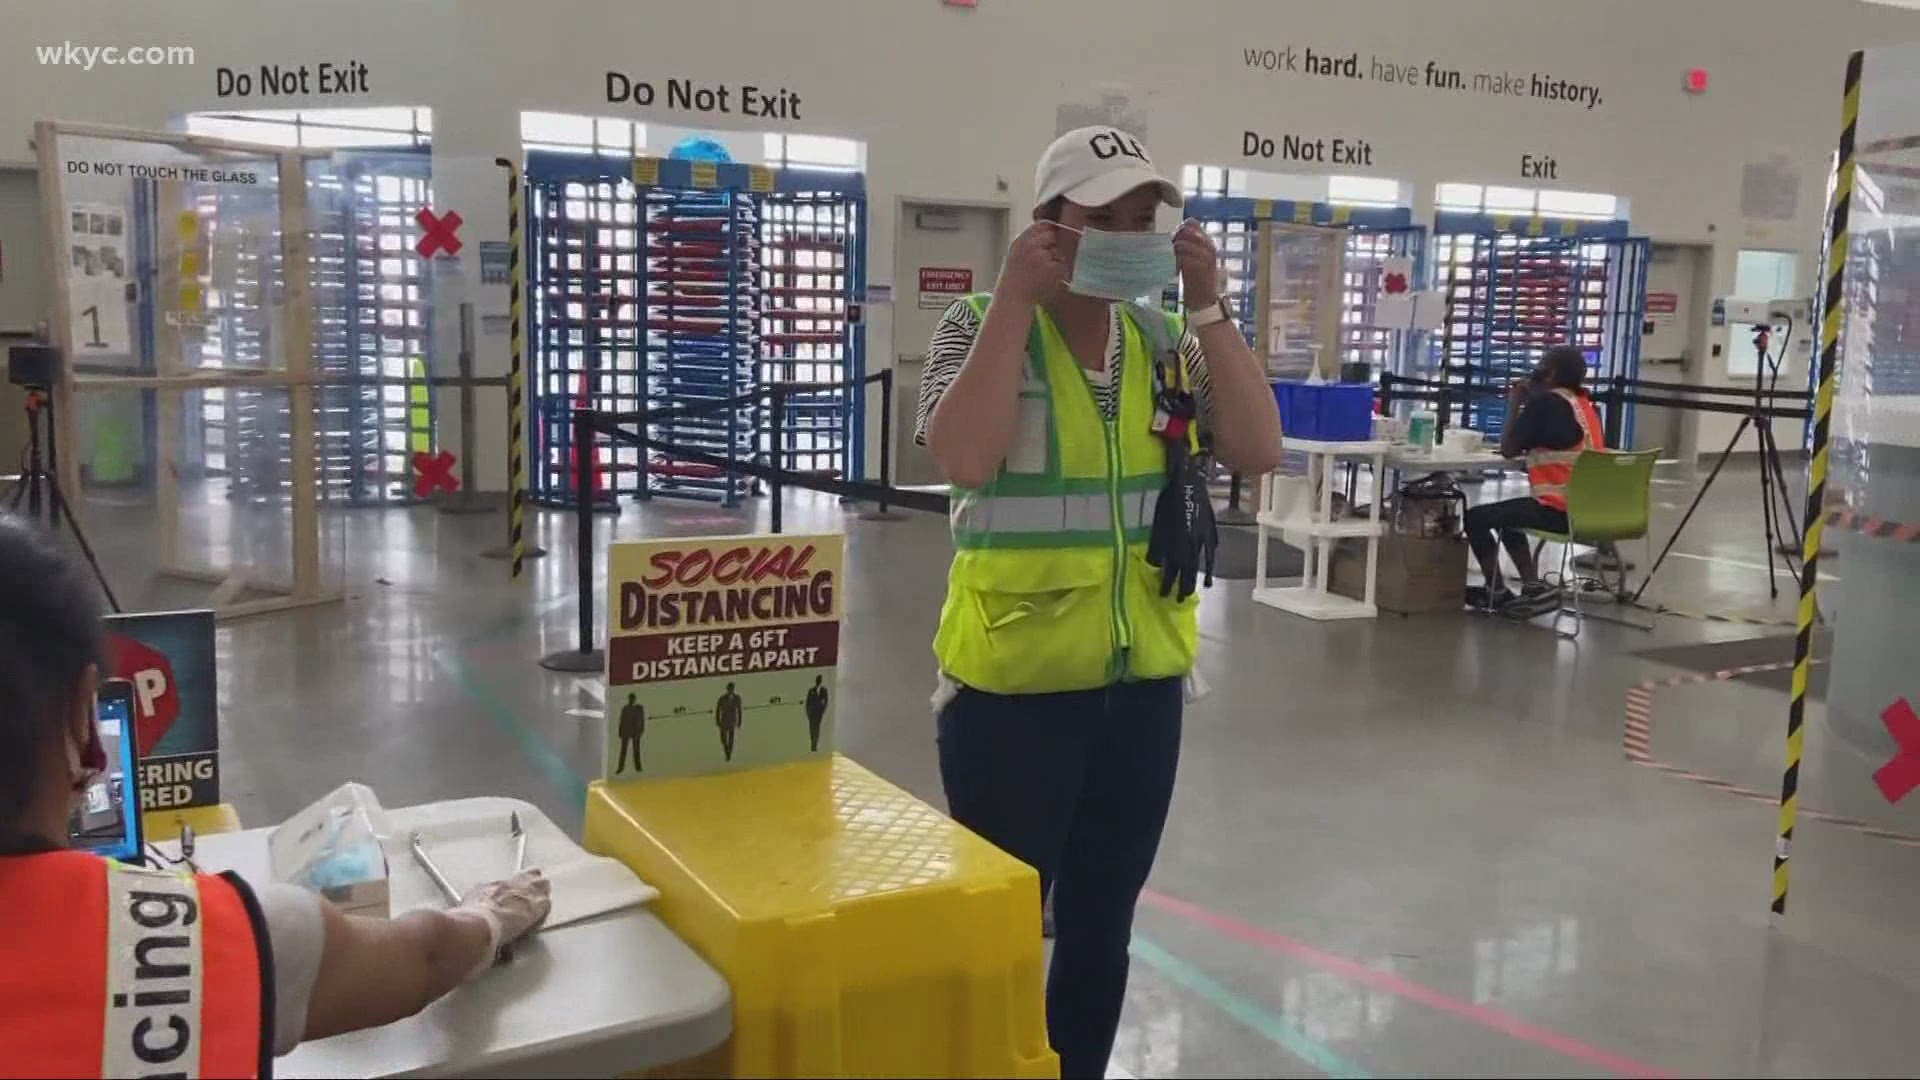 We took a first peek inside of Amazon’s North Randall distribution facility since the coronavirus pandemic began in March. Cases still pop up from time to time.